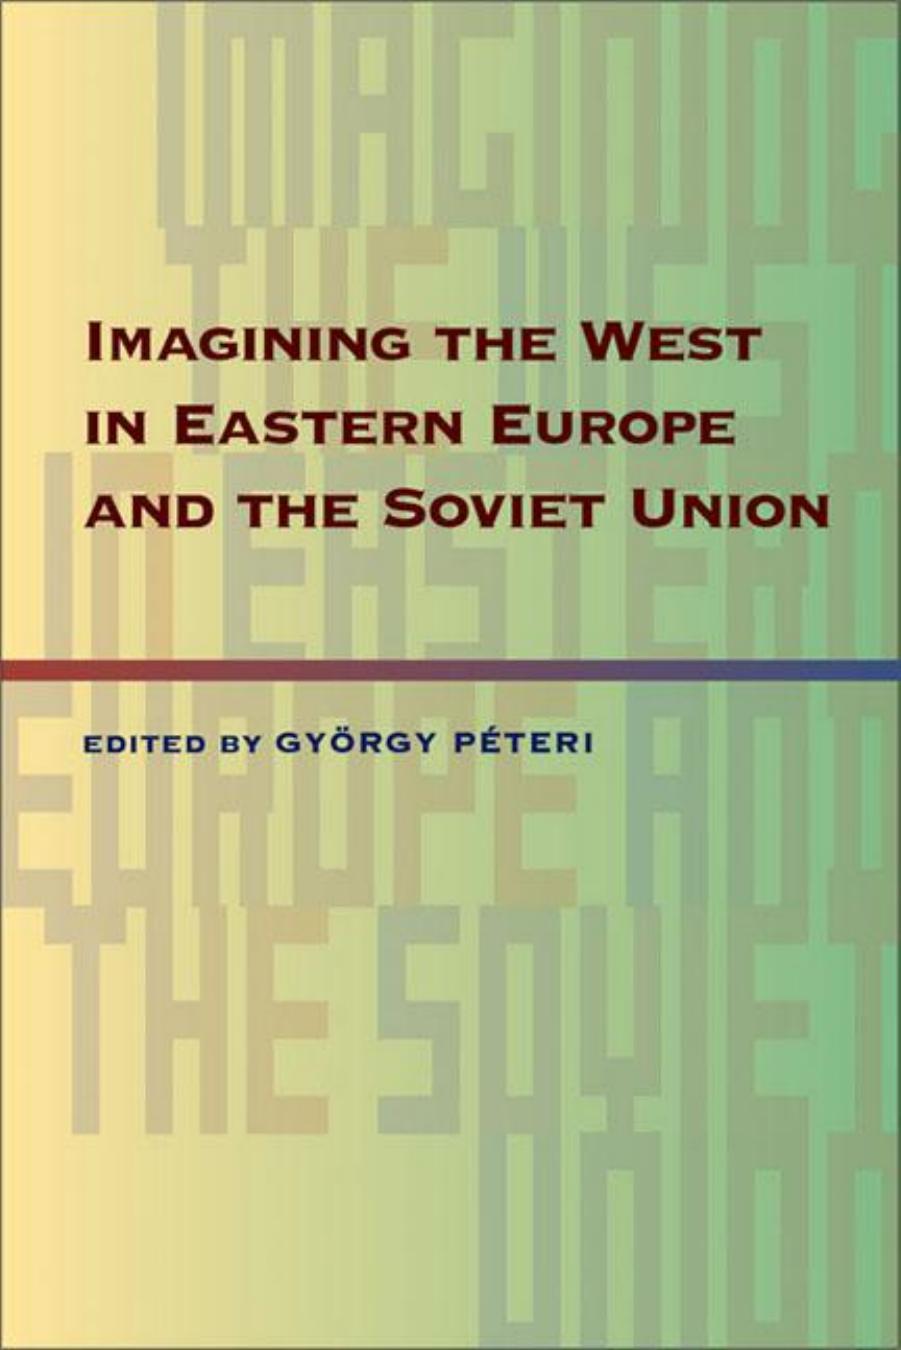 Imagining the West in Eastern Europe and the Soviet Union by Gyorgy Peteri